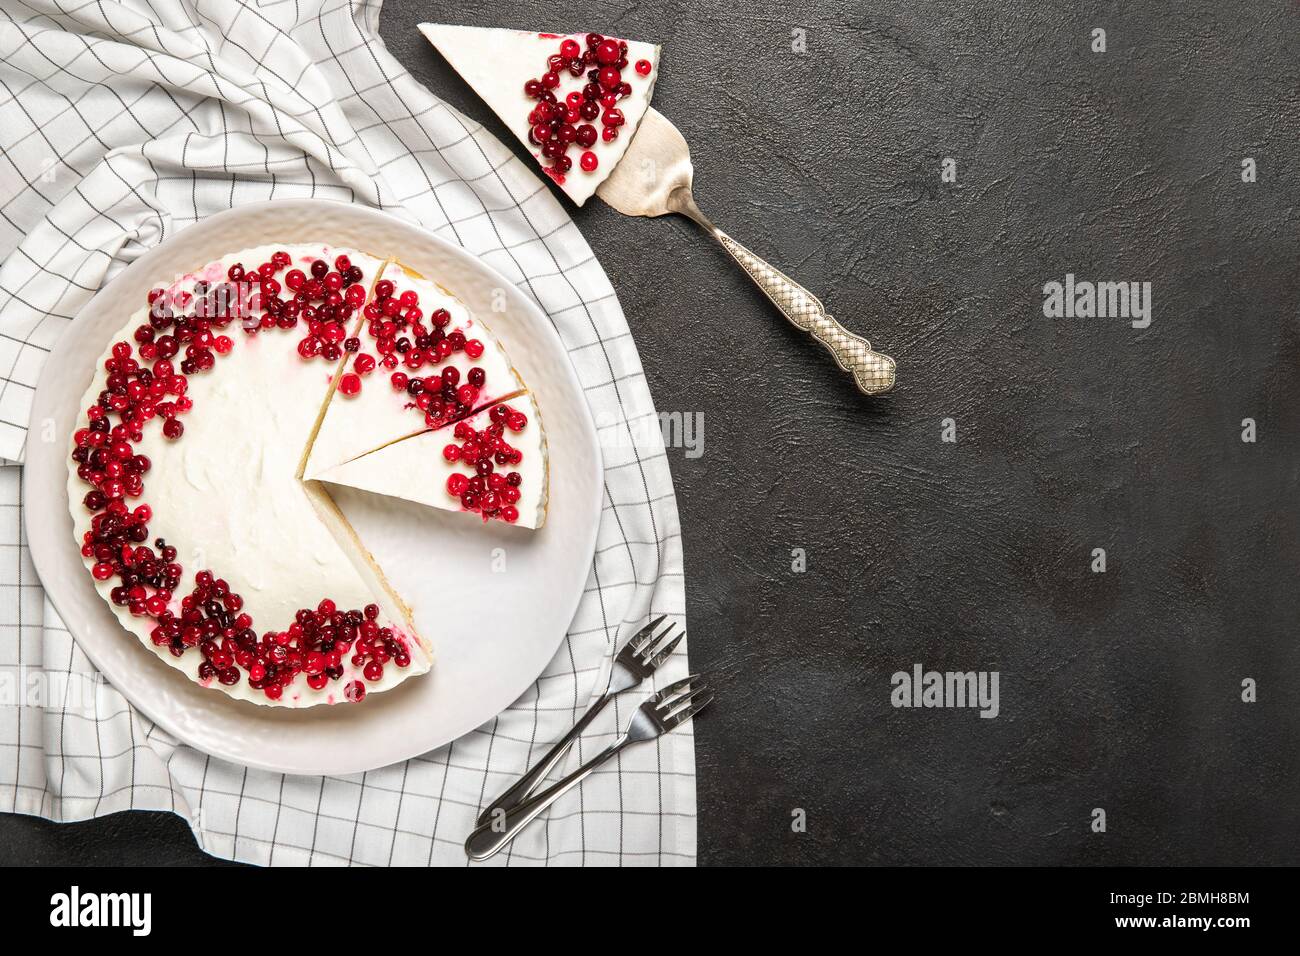 Plate with delicious cheesecake and fresh berries on the table Stock Photo